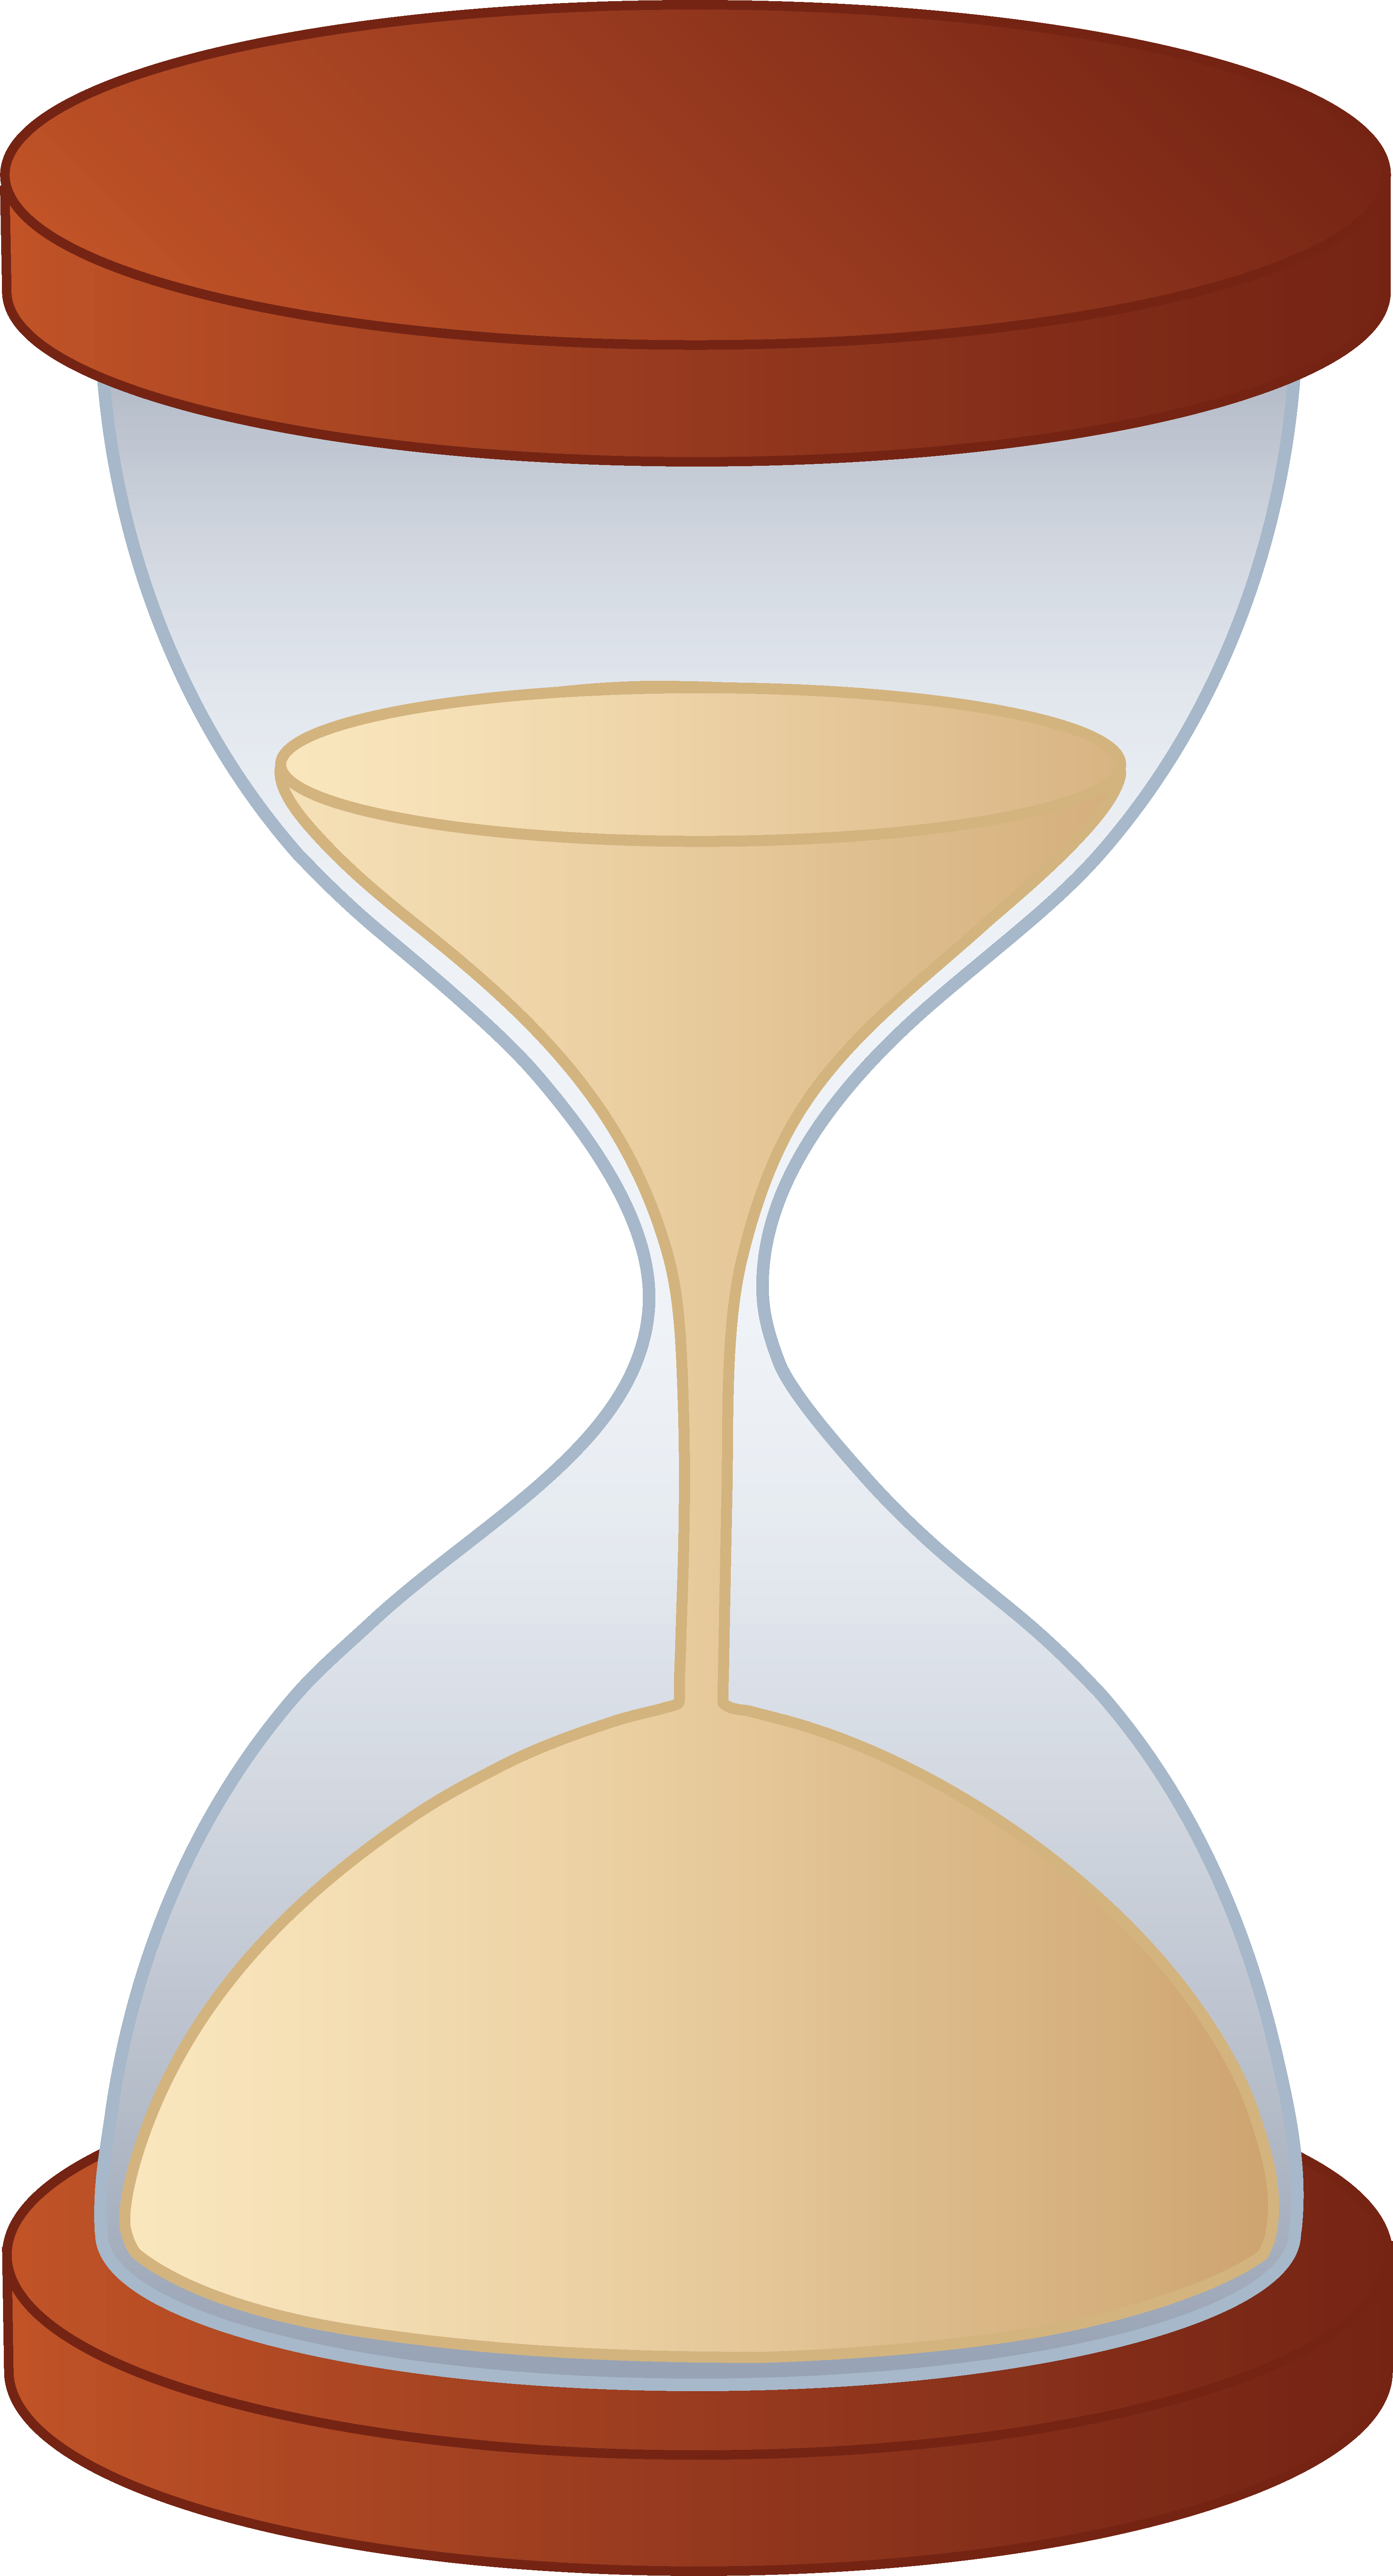 Clipart hourglass timer